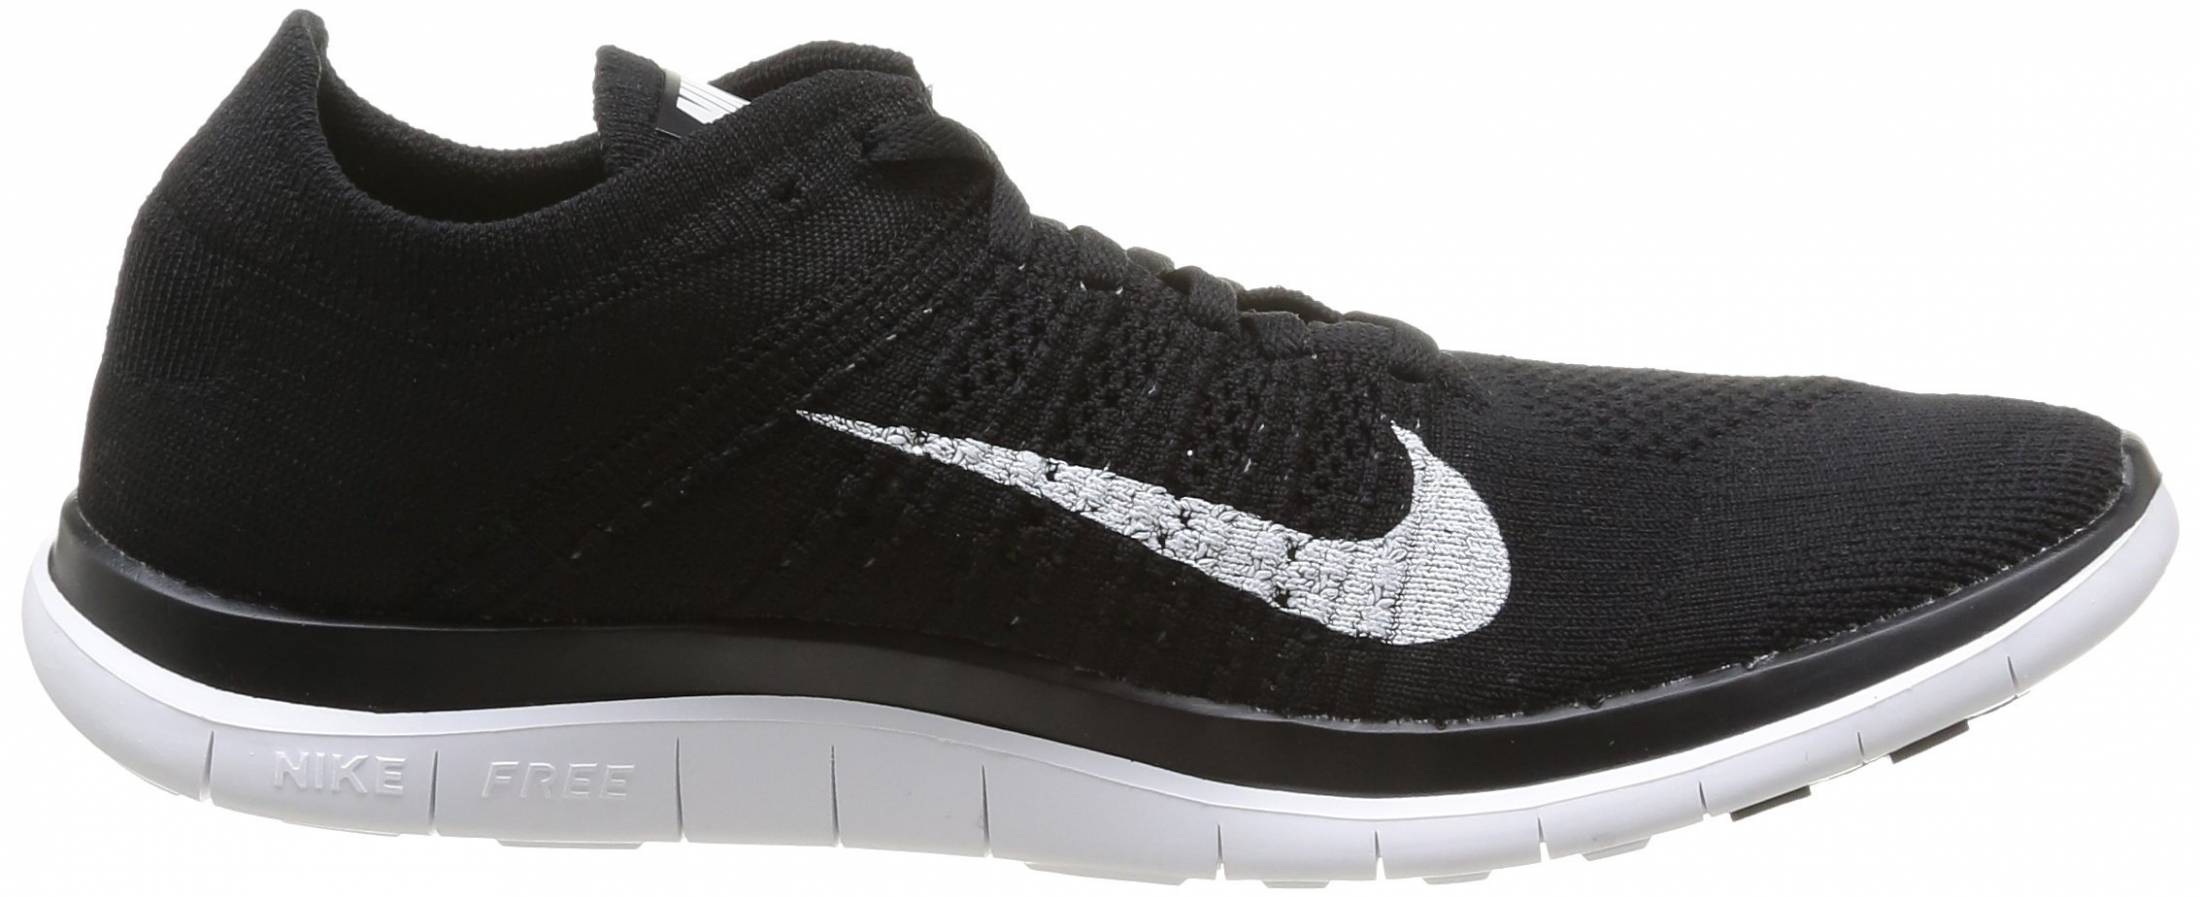 Nike Flyknit 4.0 Review 2022, Facts, Deals |